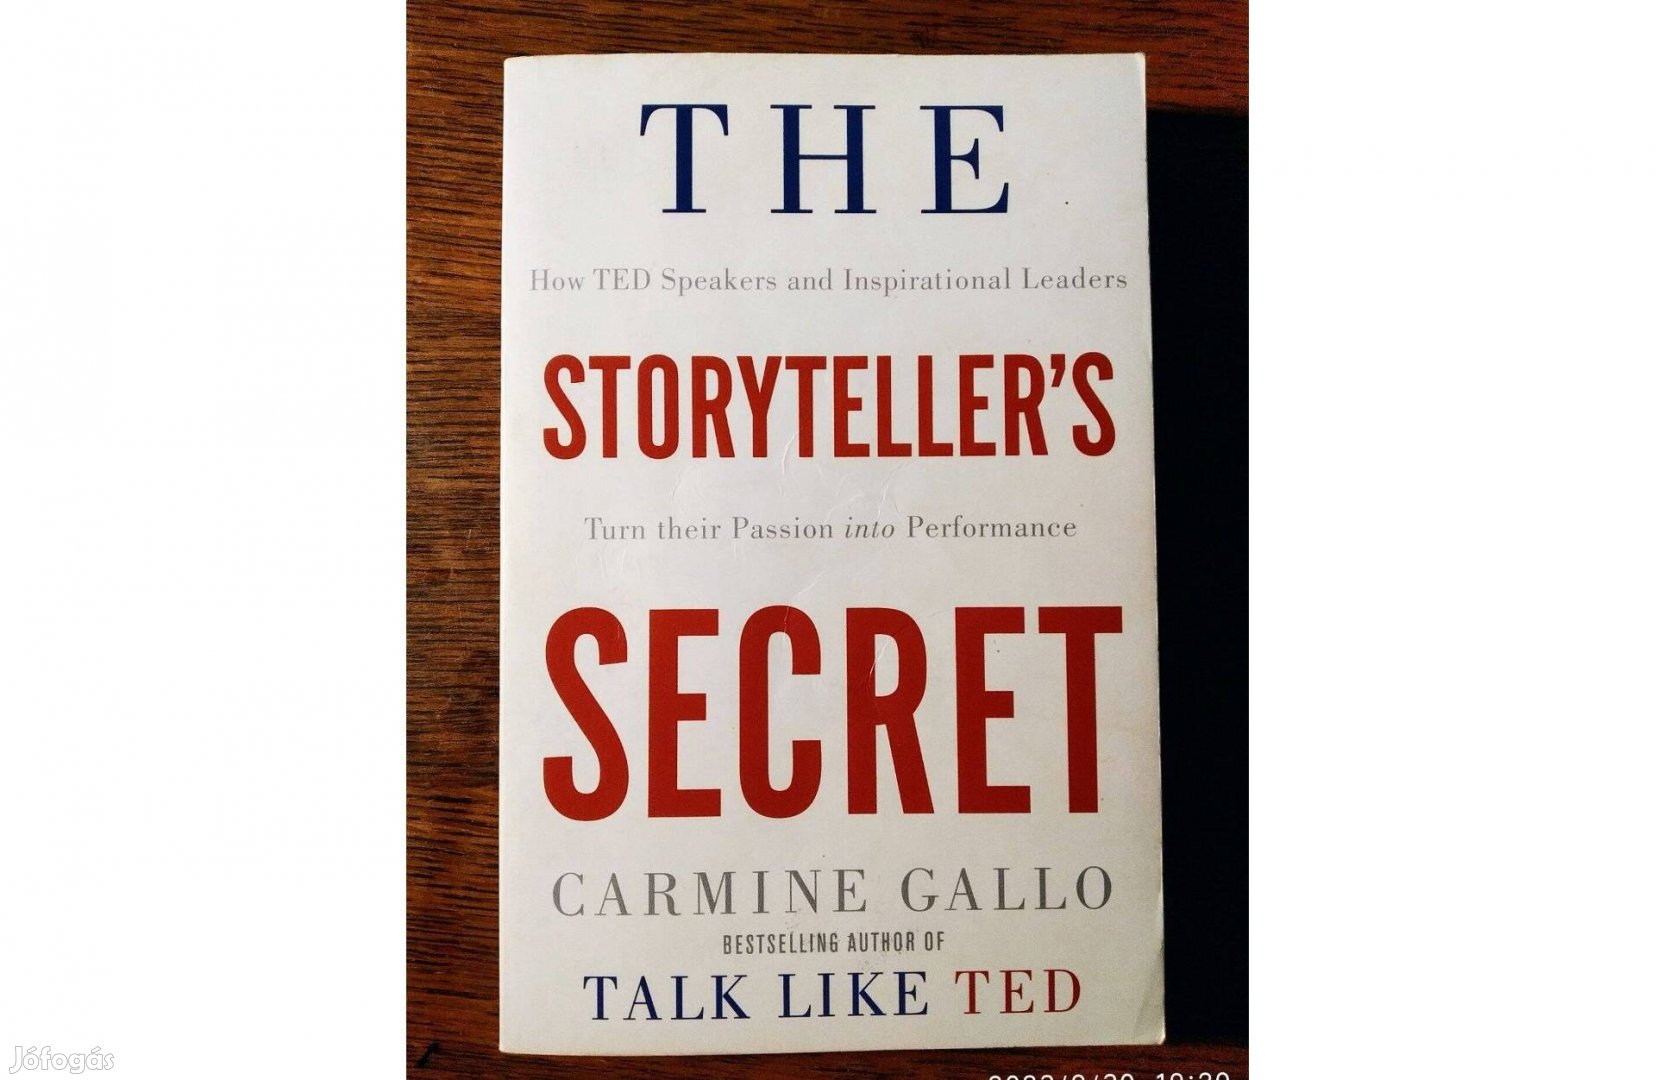 The Storyteller's Secret - How TED Speakers and Inspirational Leaders